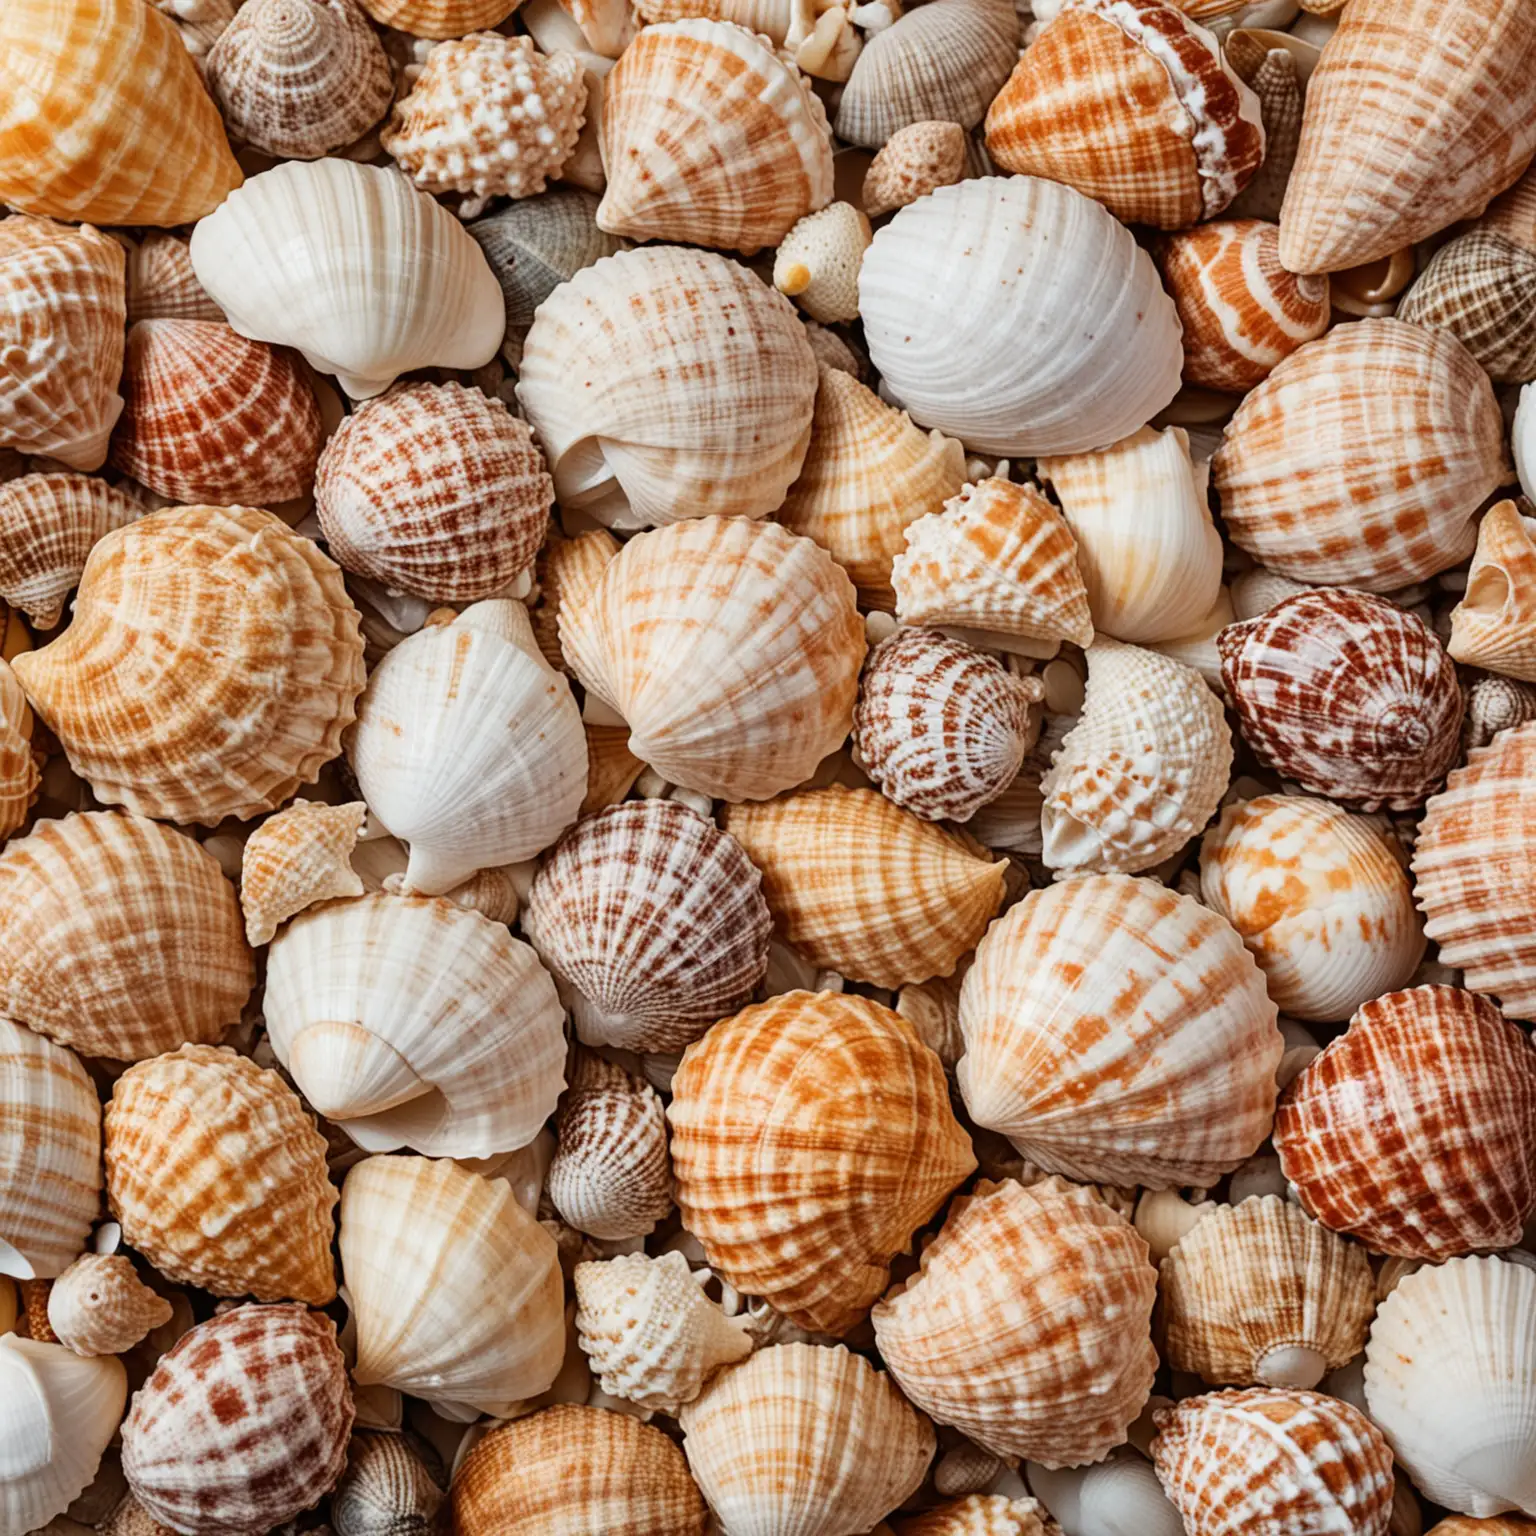 A GROUP OF DIFFERENT TYPES OF SEASHELLS, LARGE AND SMALL SHELLS,VIBRANT COLORS